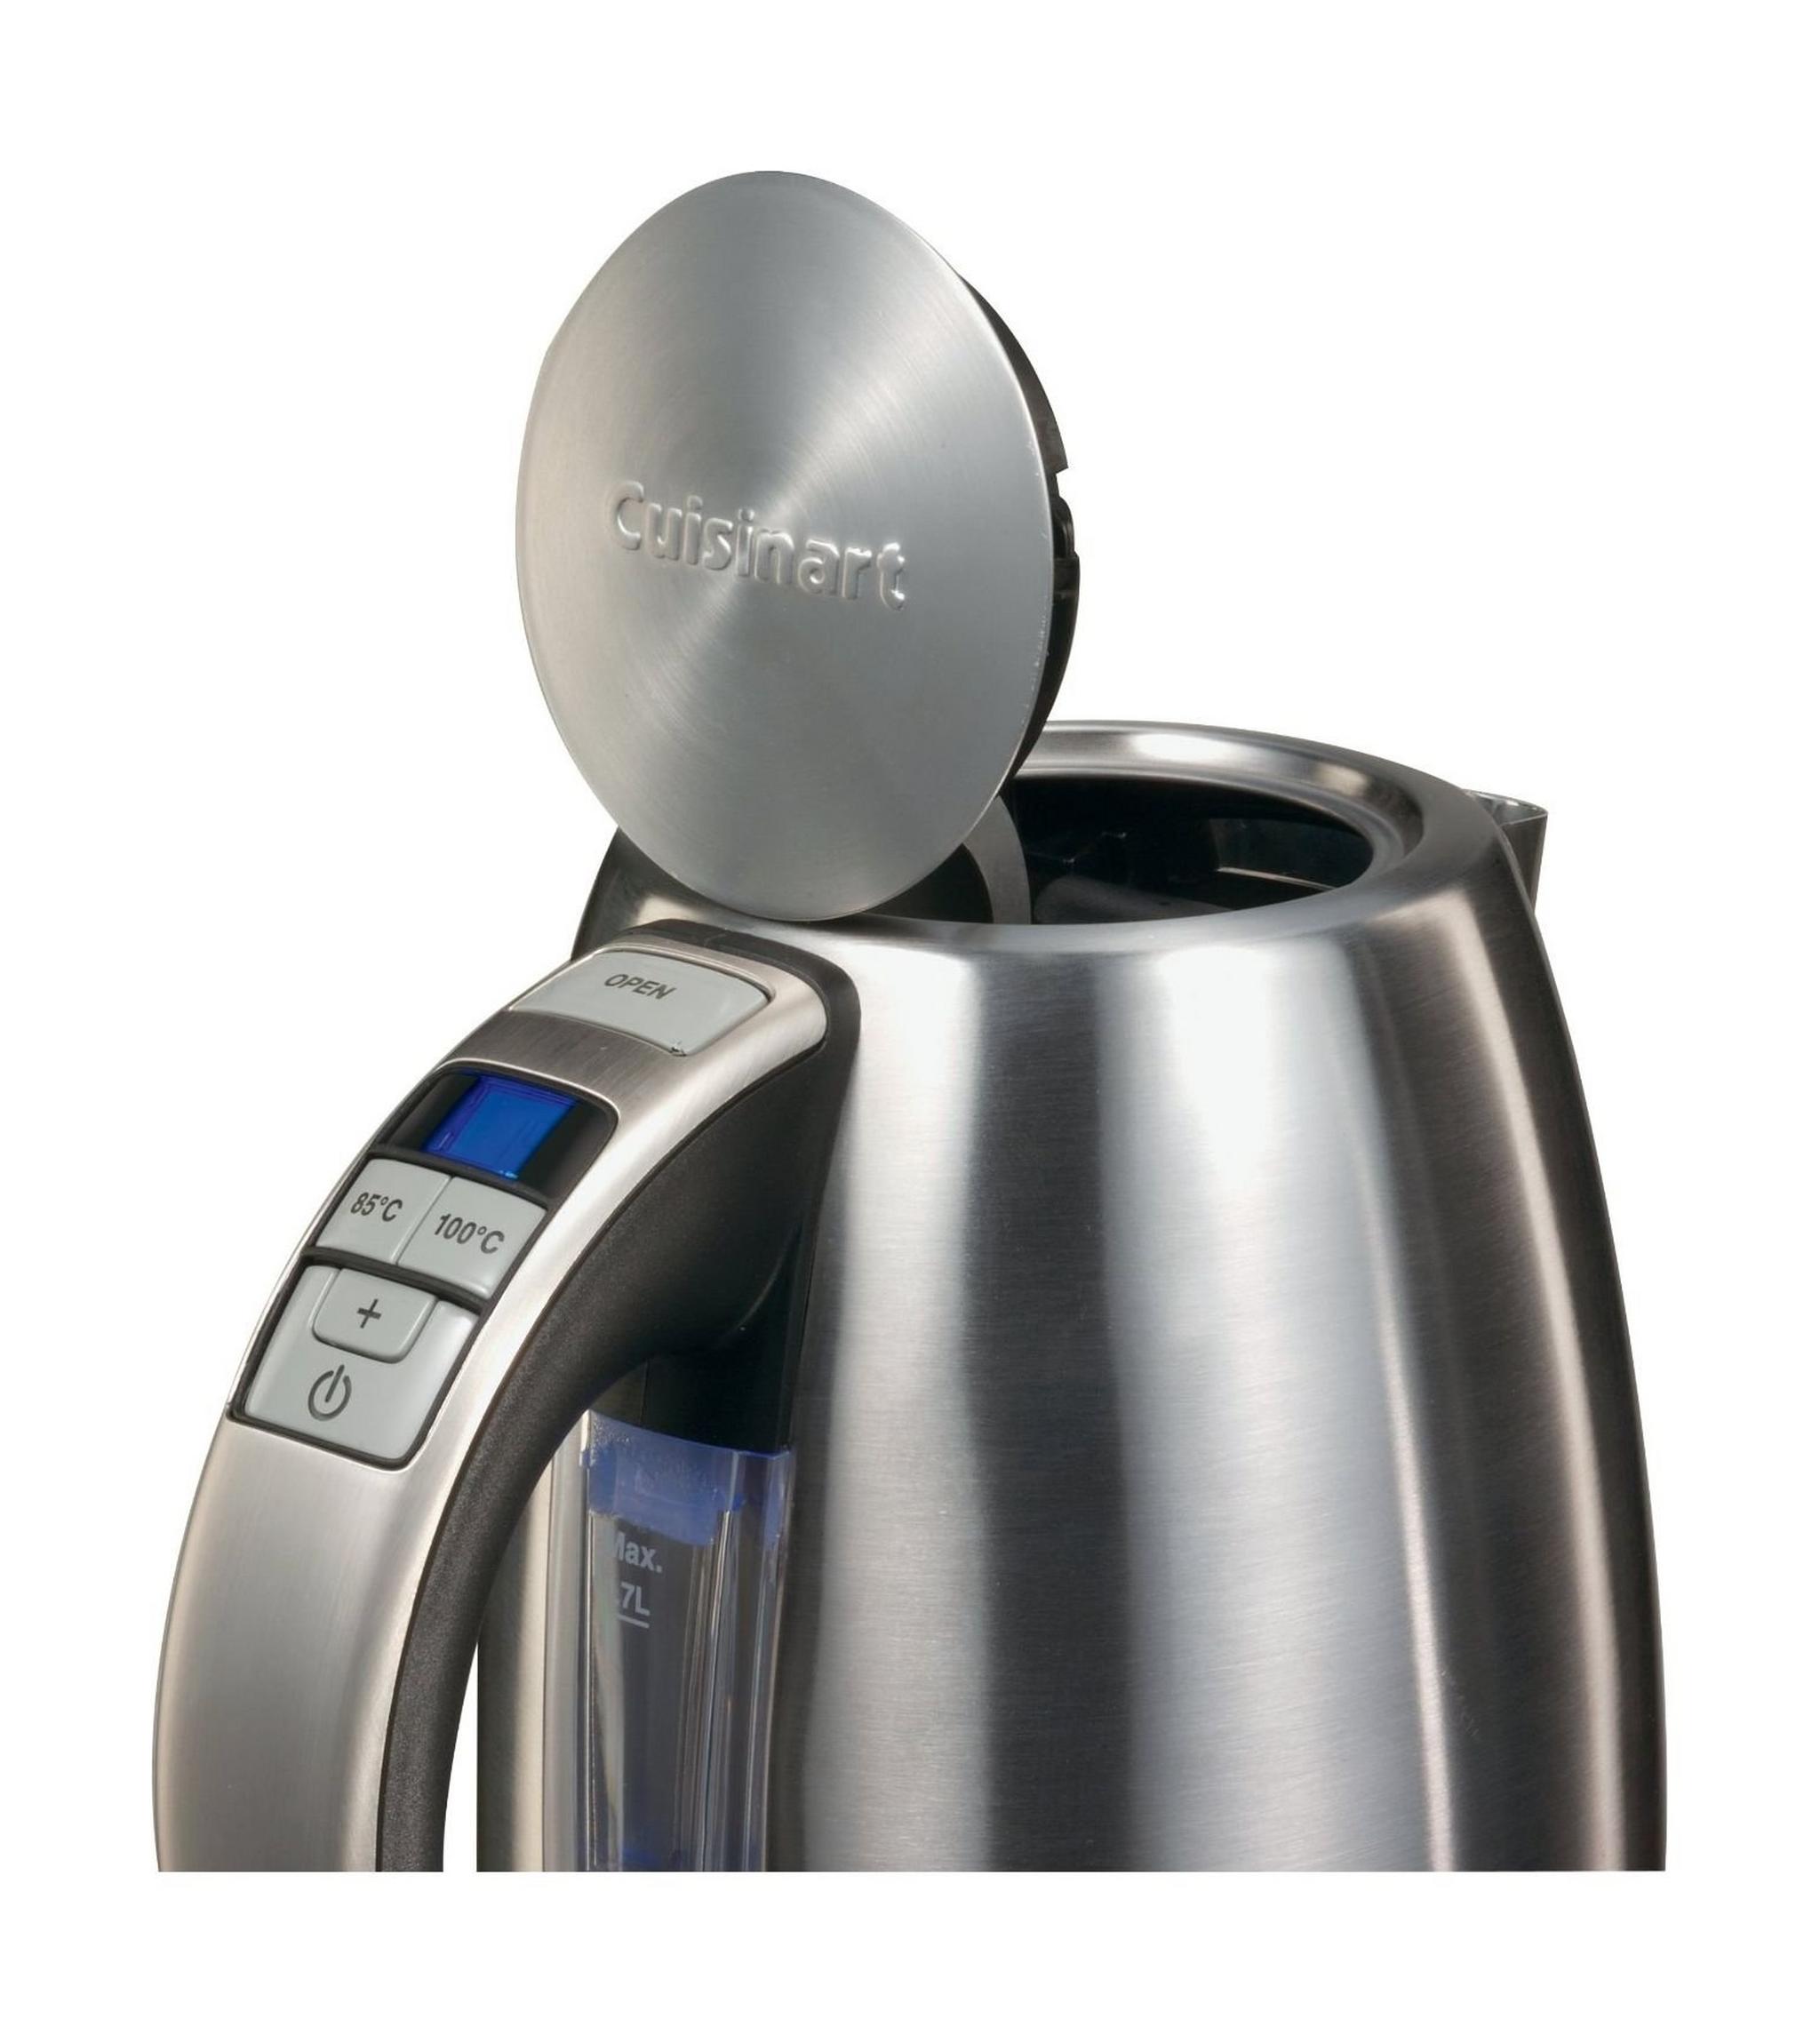 Cuisinart Cordless Stainless Steel Electric Kettle (CA-CPK17E) - Silver